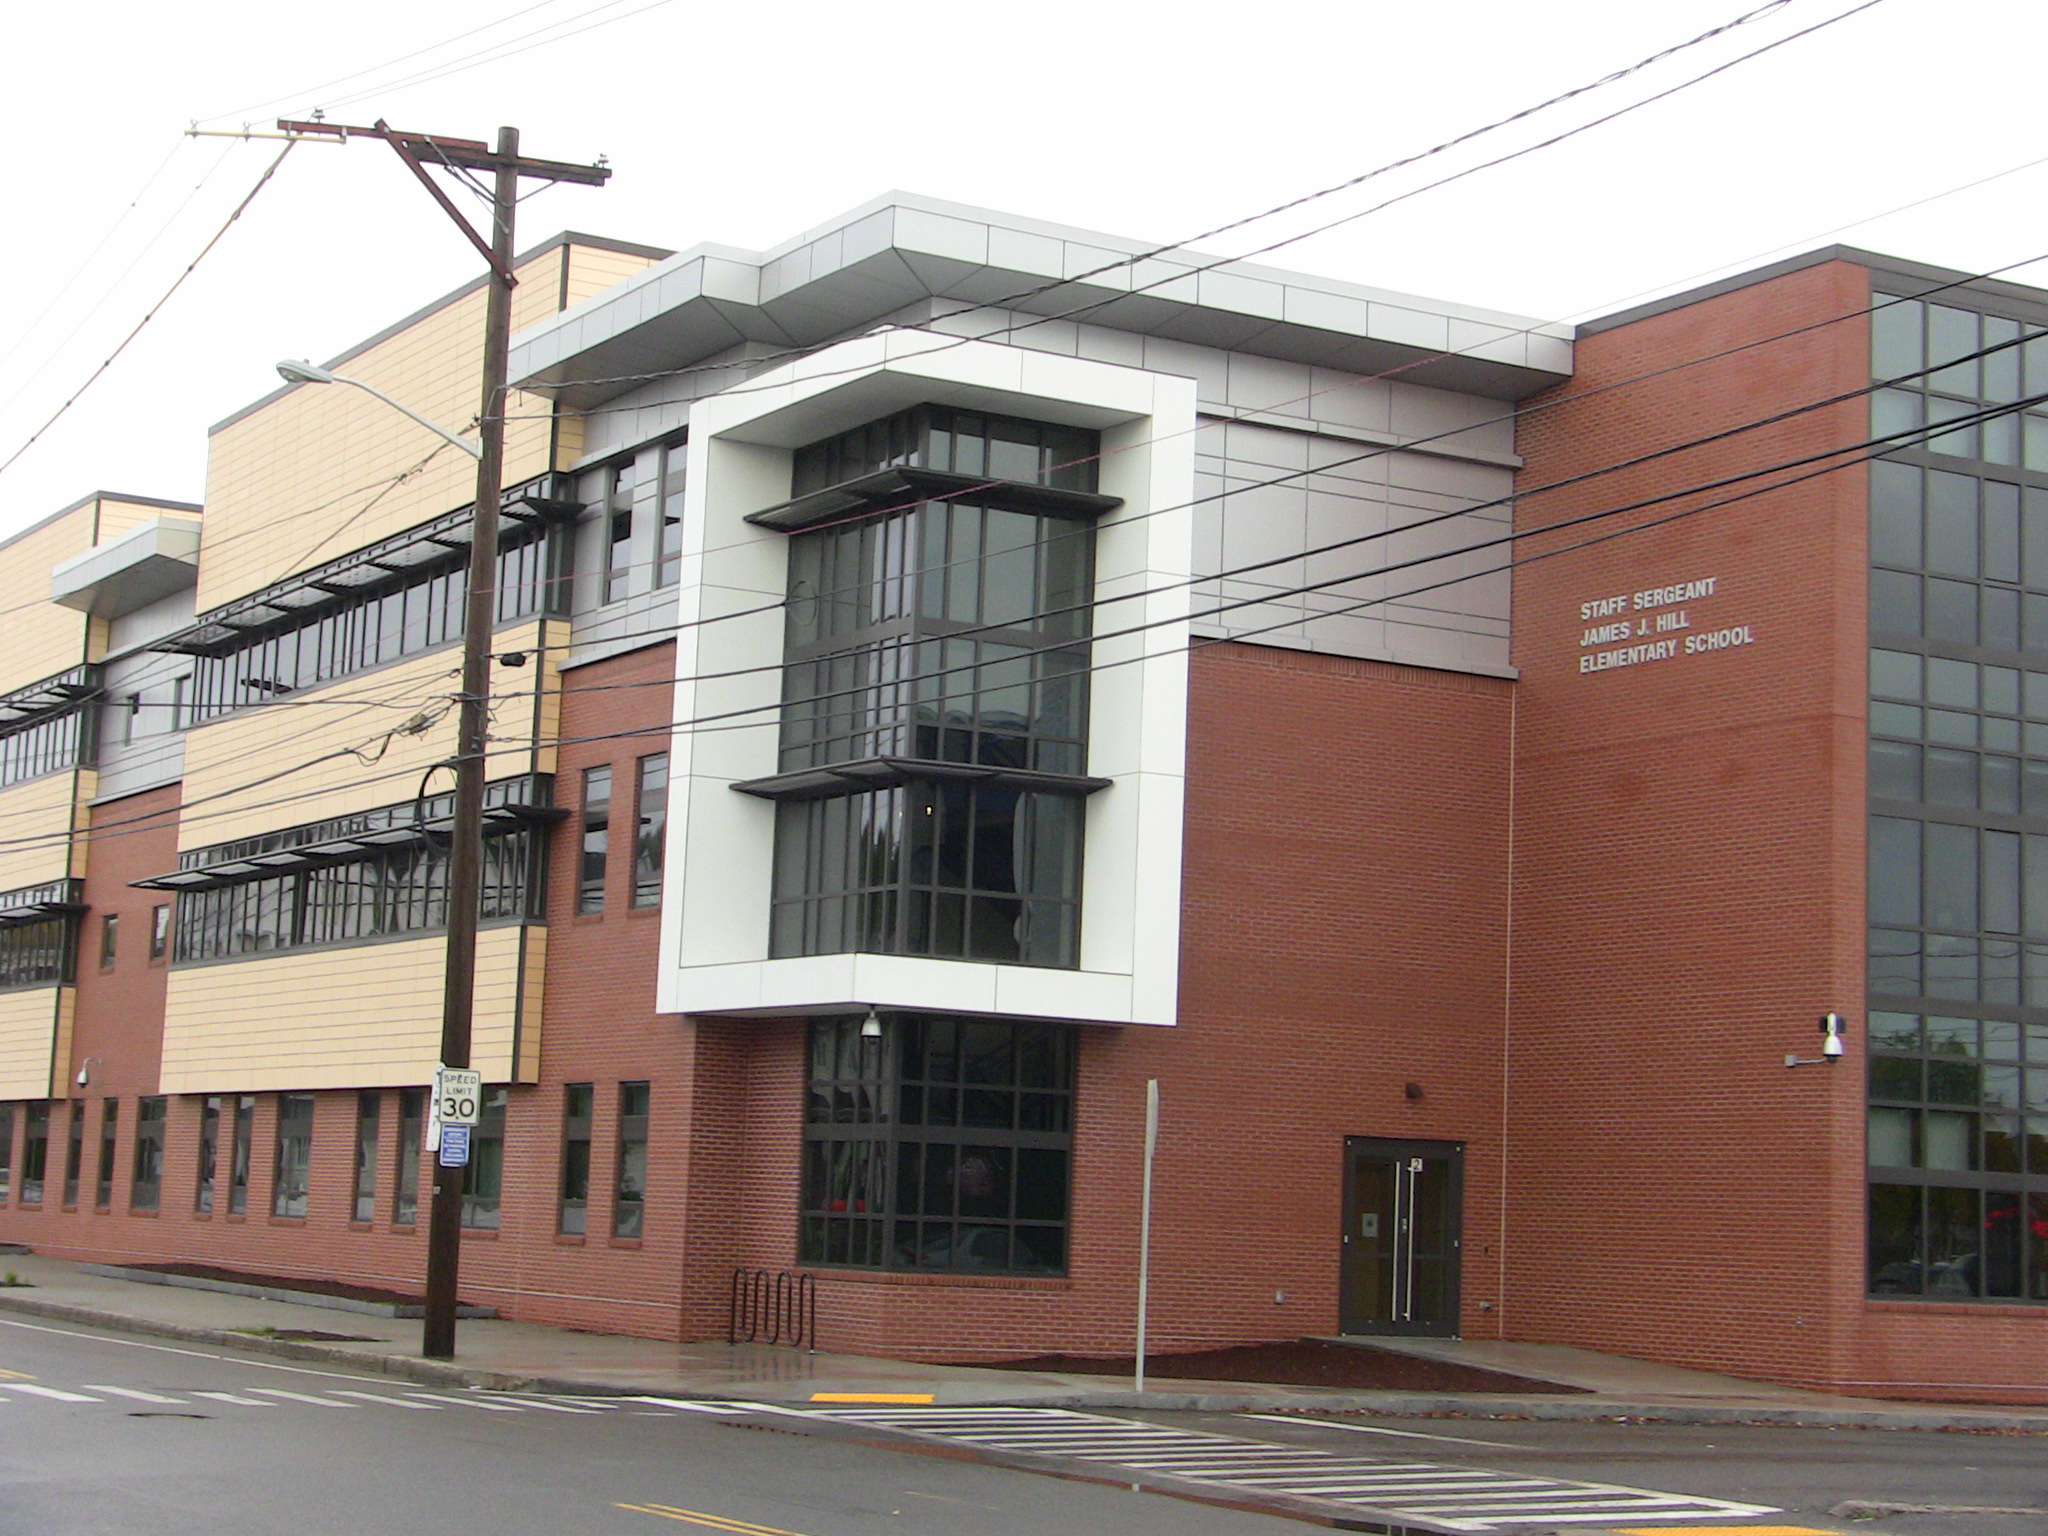 The new Hill Elementary School in Revere, constructed on-time and on-budtget by CTA Construction.